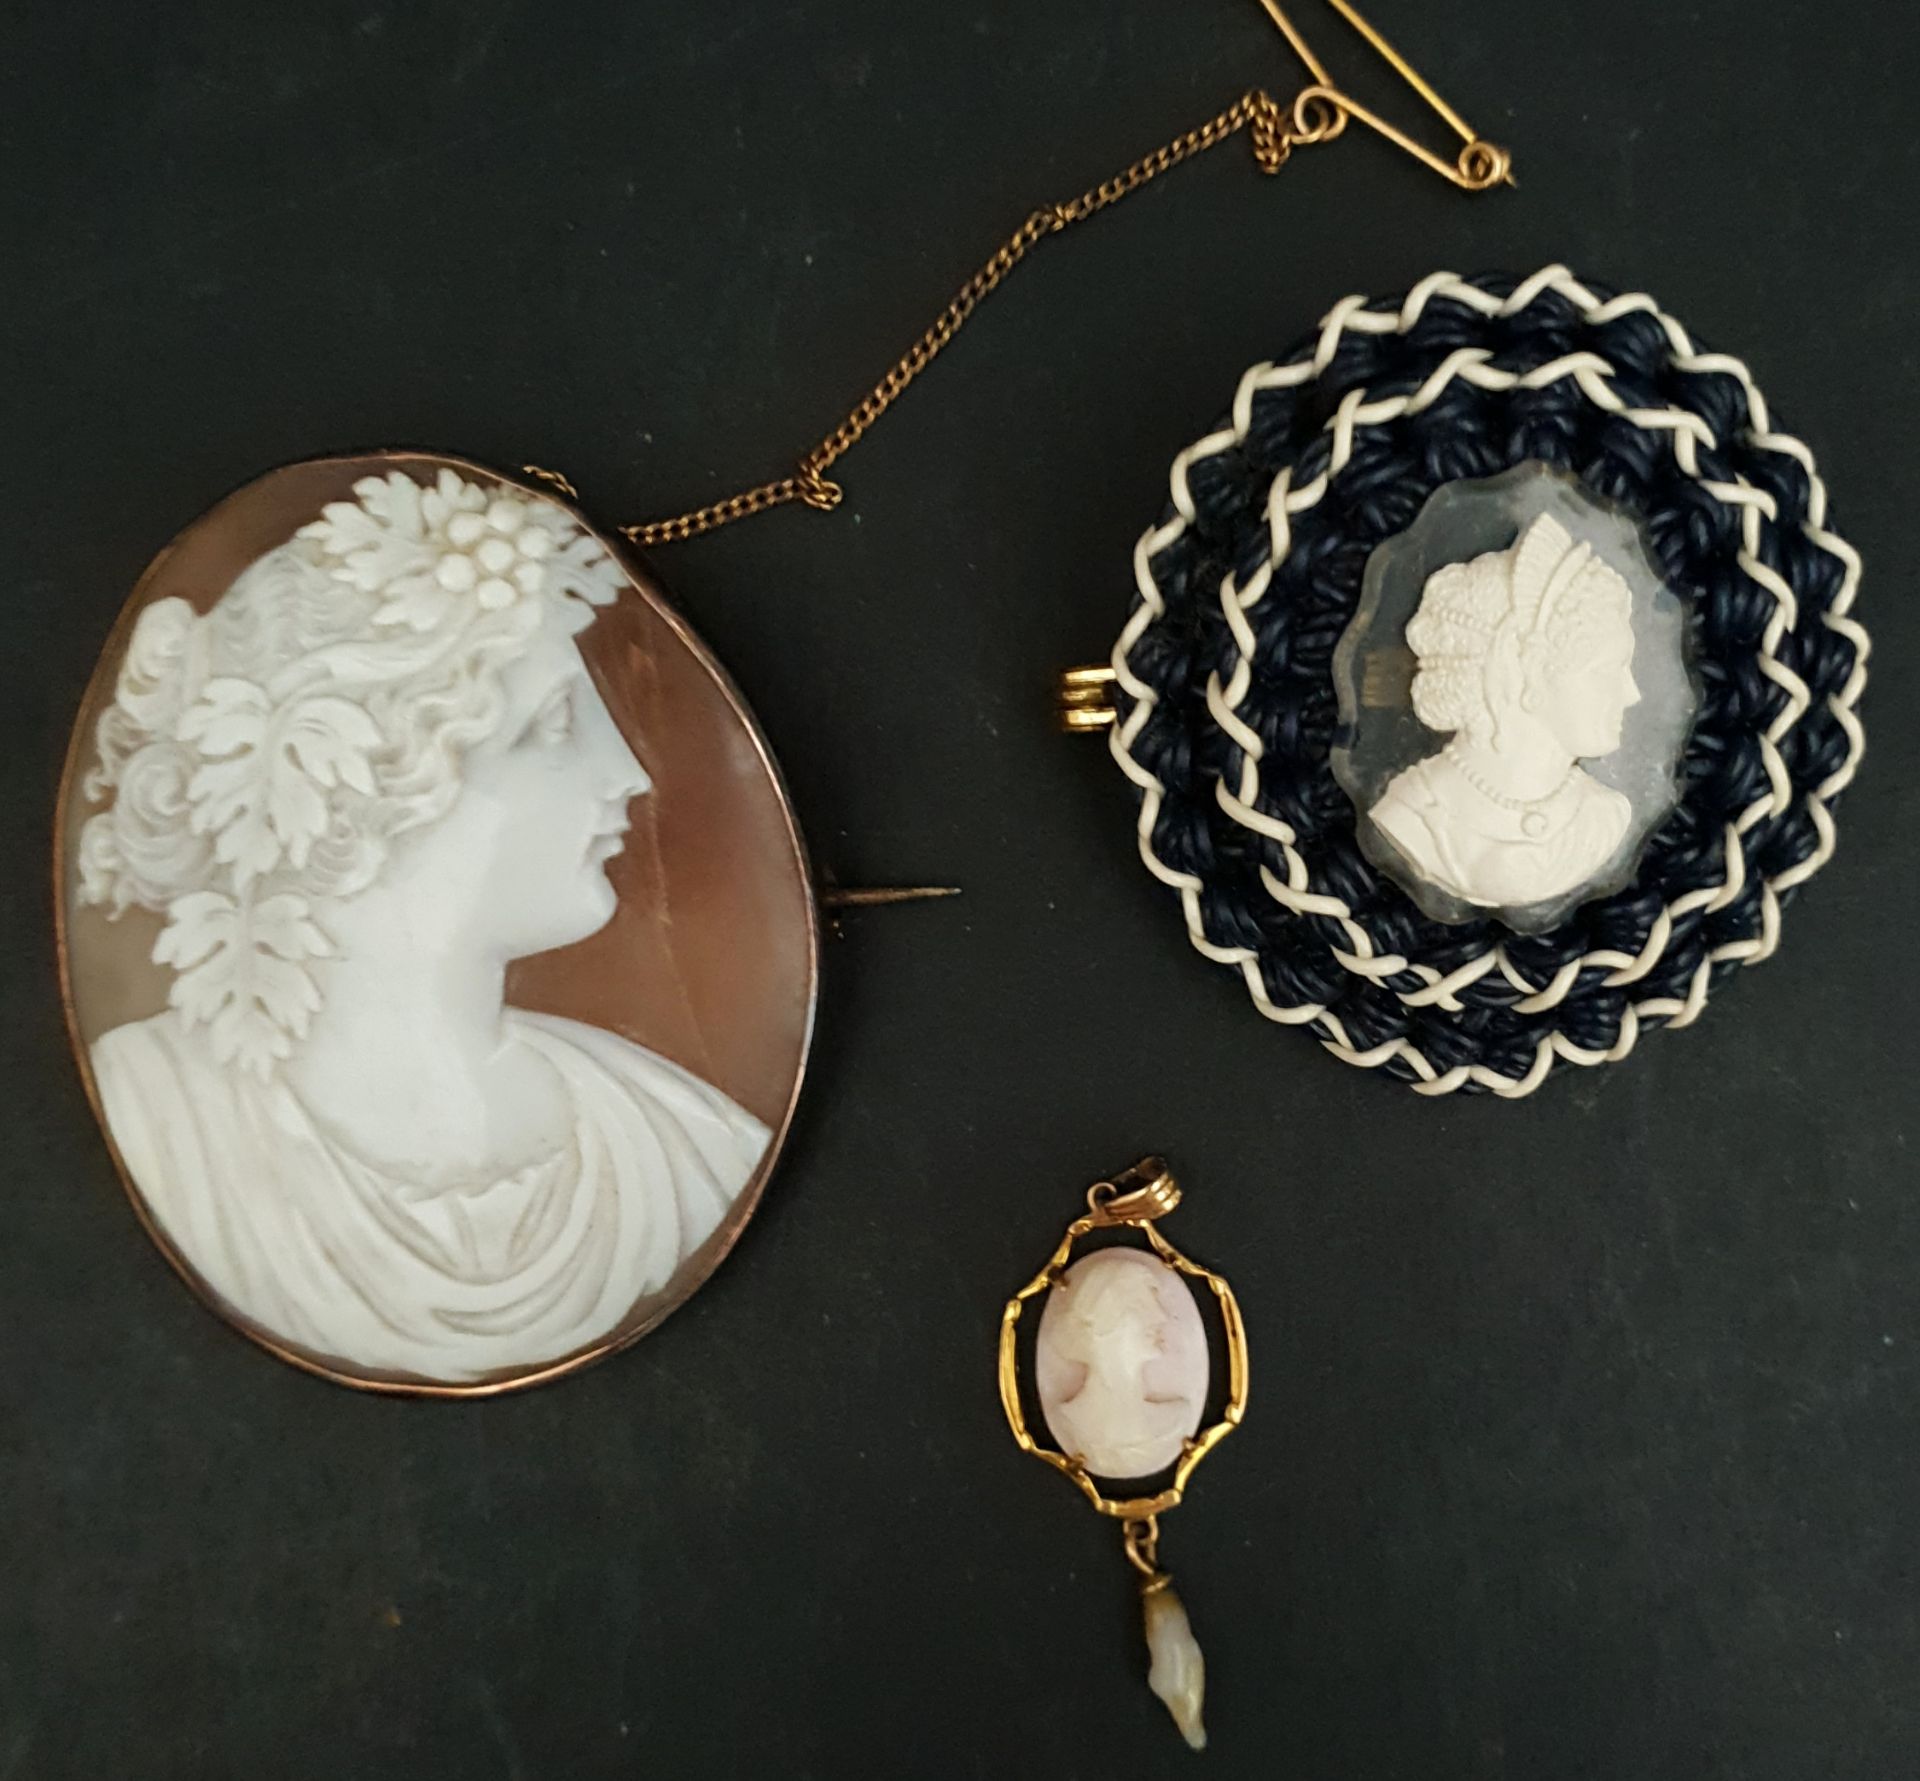 Jewellery 3 x Antique Cameo Brooches